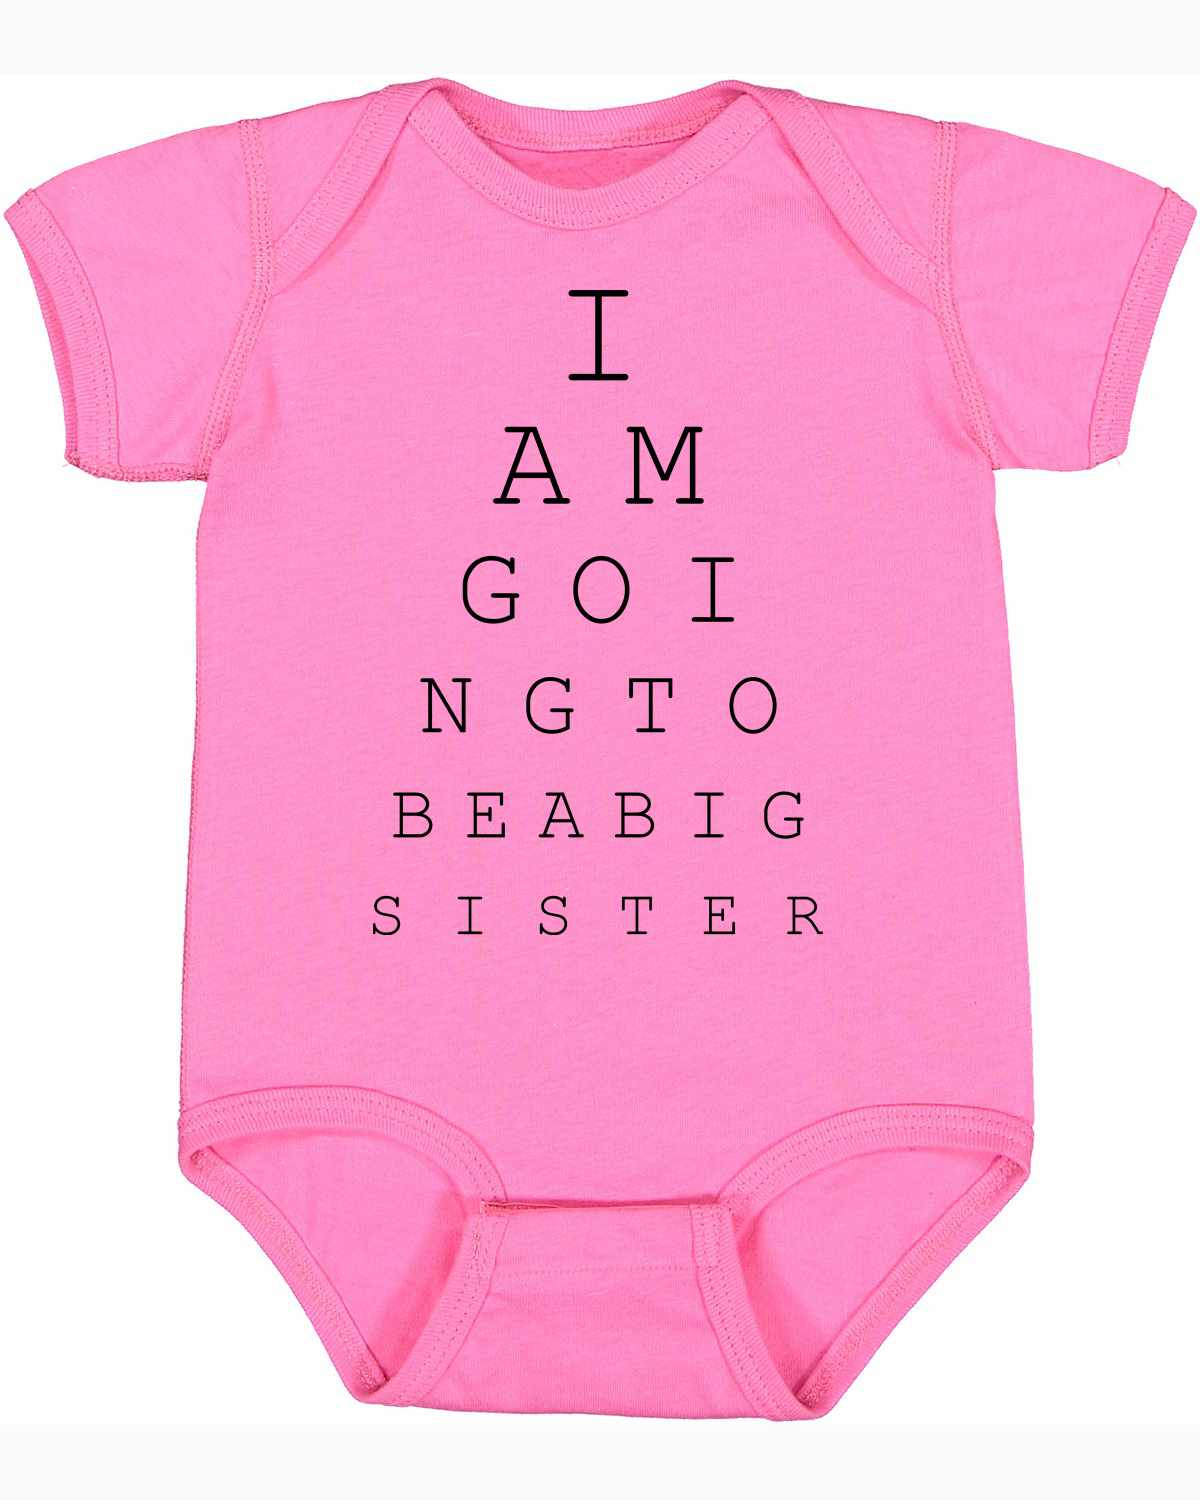 I AM GOING TO BE A BIG SISTER EYE CHART on Infant BodySuit (#1160-10)